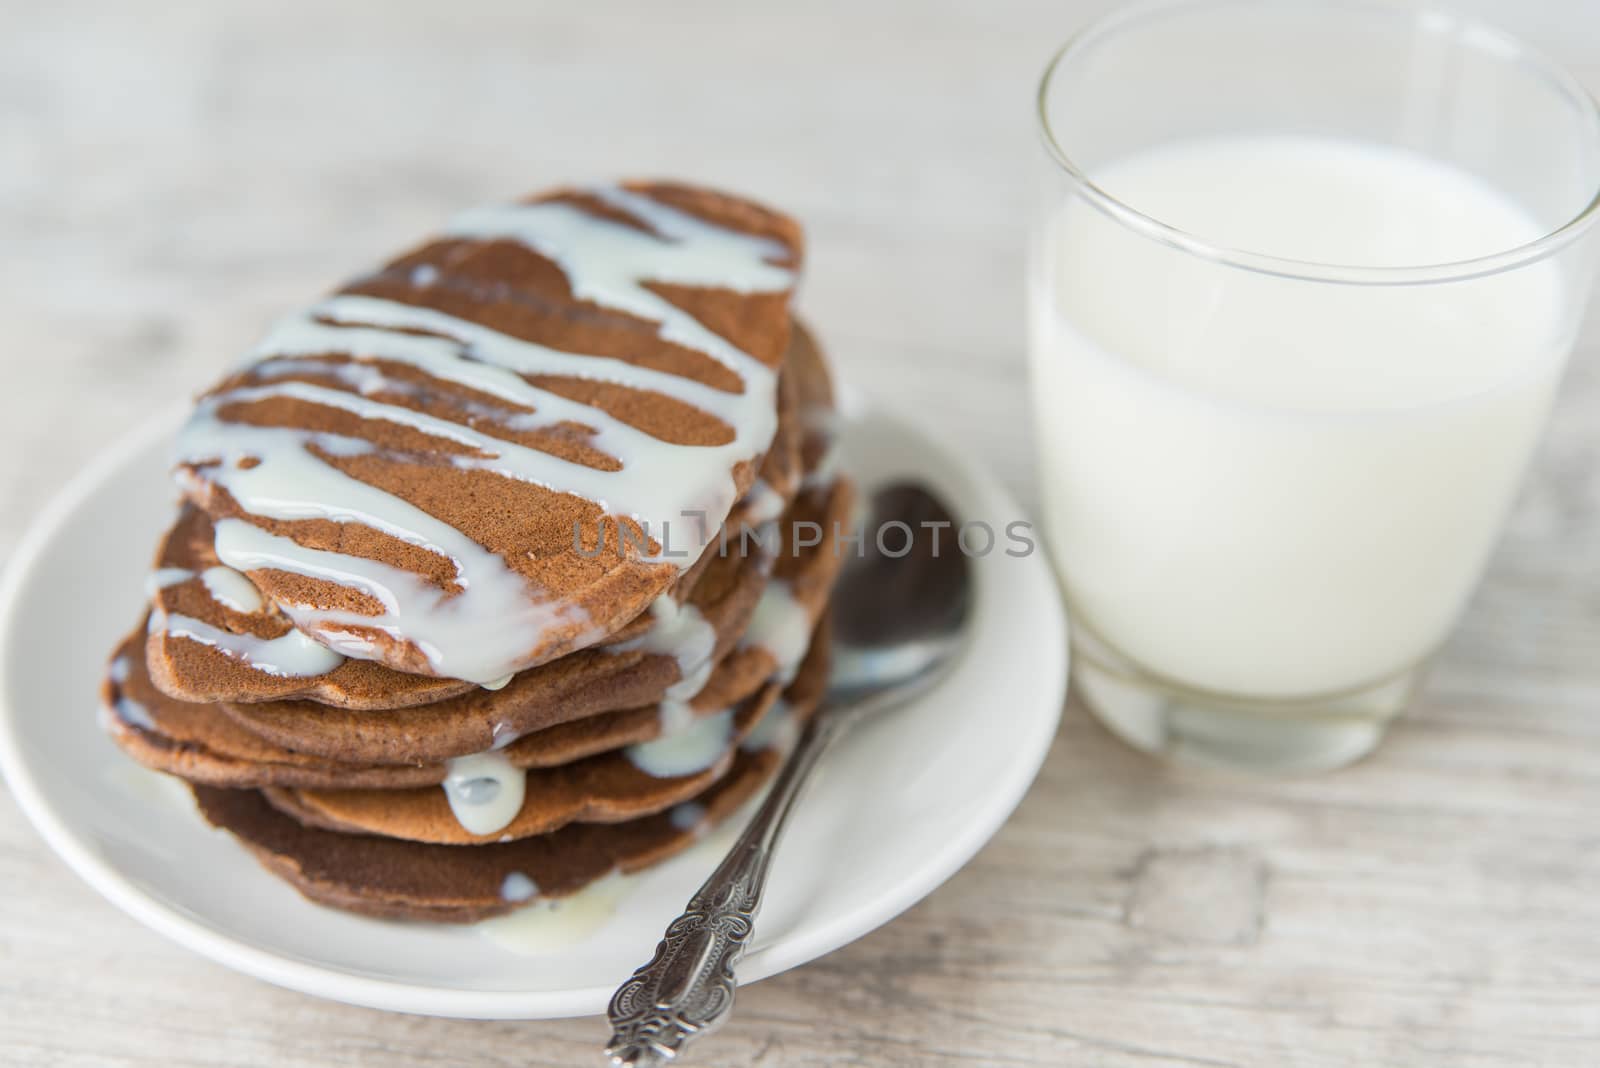 Chocolate pancakes with the glass of milk on the wooden table